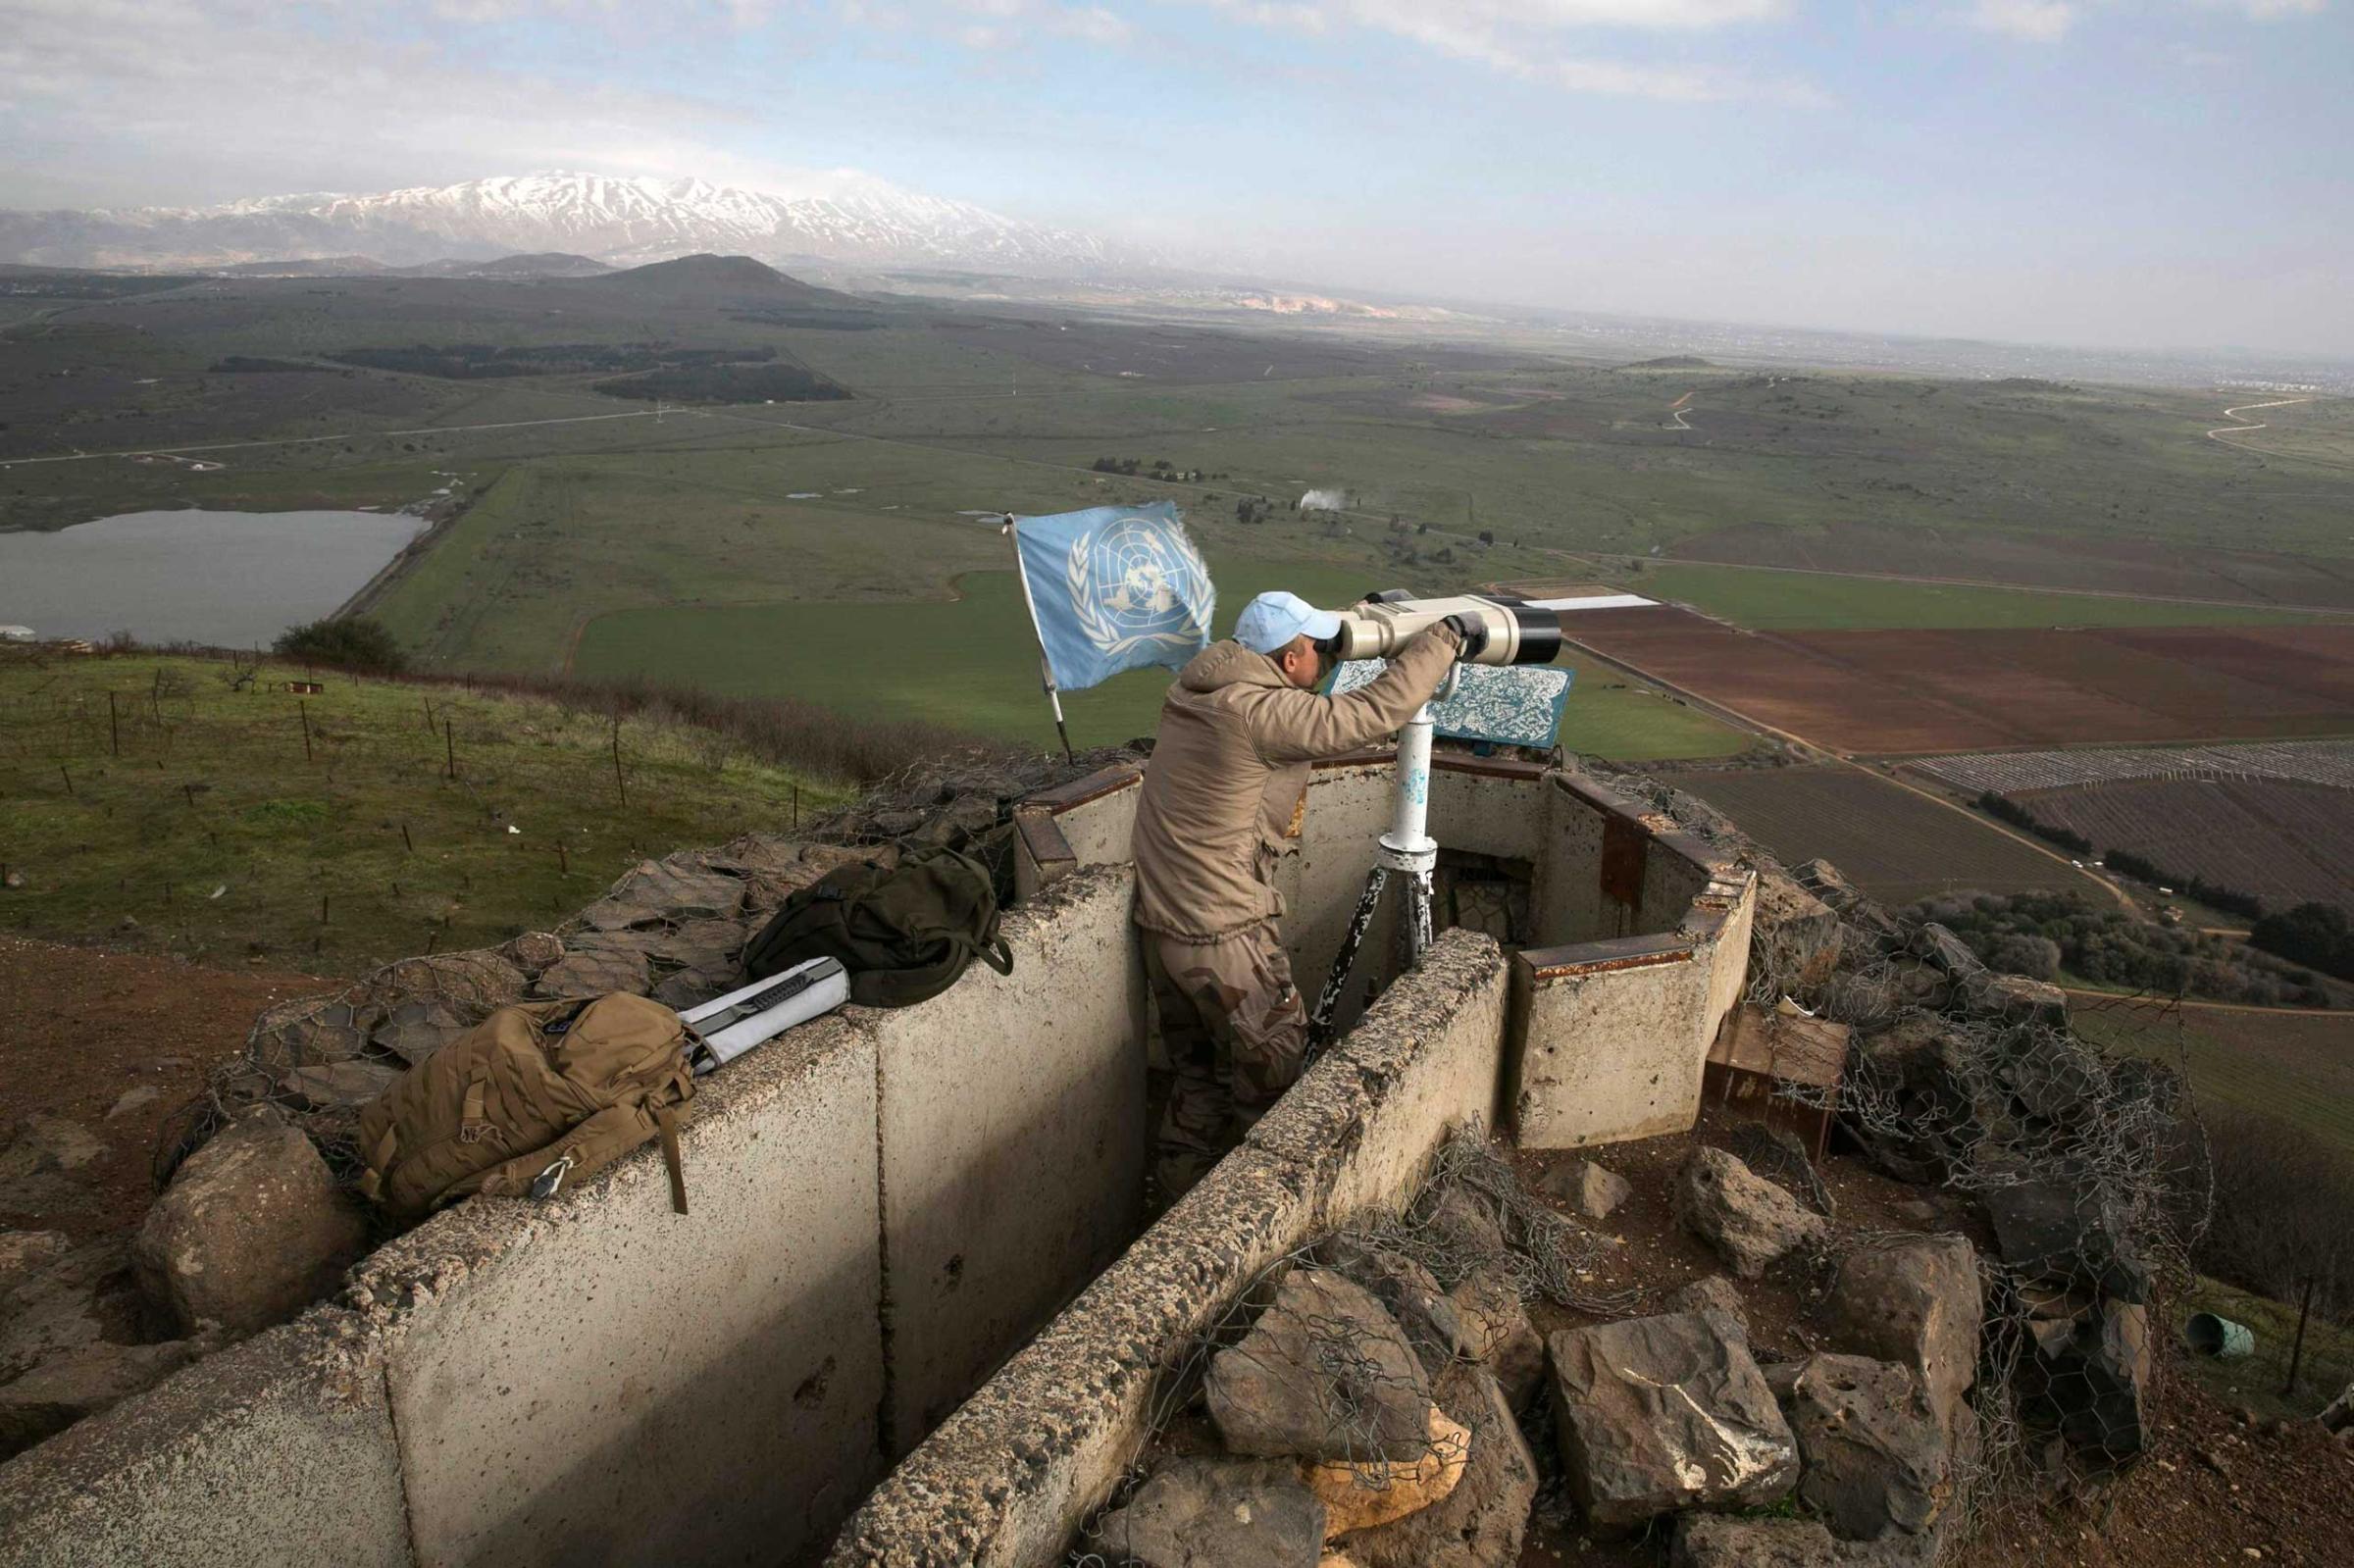 A member of the United Nations Disengagement Observer Force looks through binoculars at Mount Bental, an observation post in the Israeli occupied Golan Heights, Jan. 28, 2015.